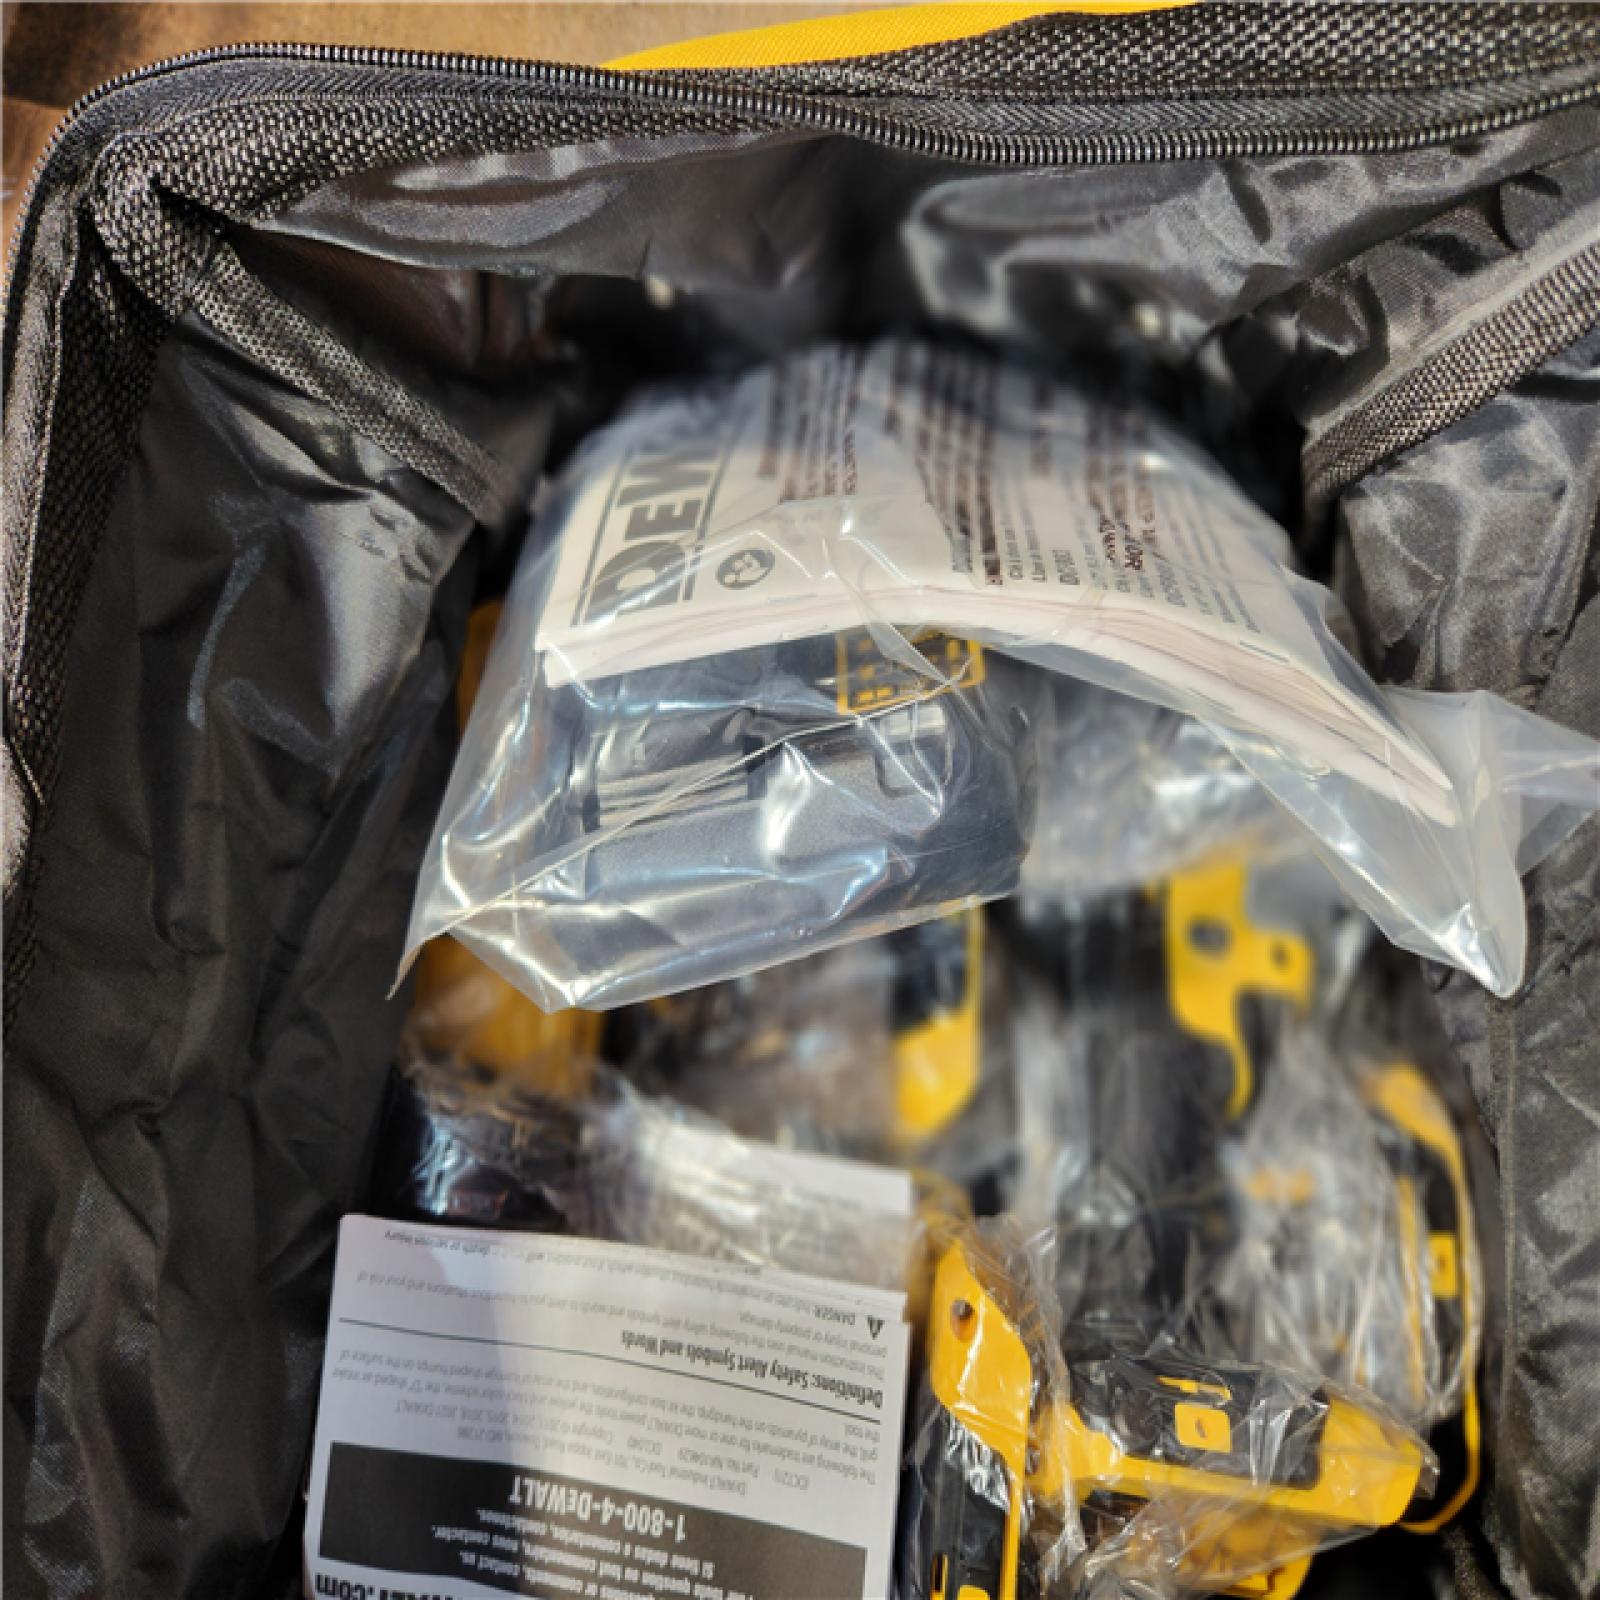 Houston Location - DEWALT 20V MAX 4pc Cordless Combo Kit - Appears IN NEW Condition